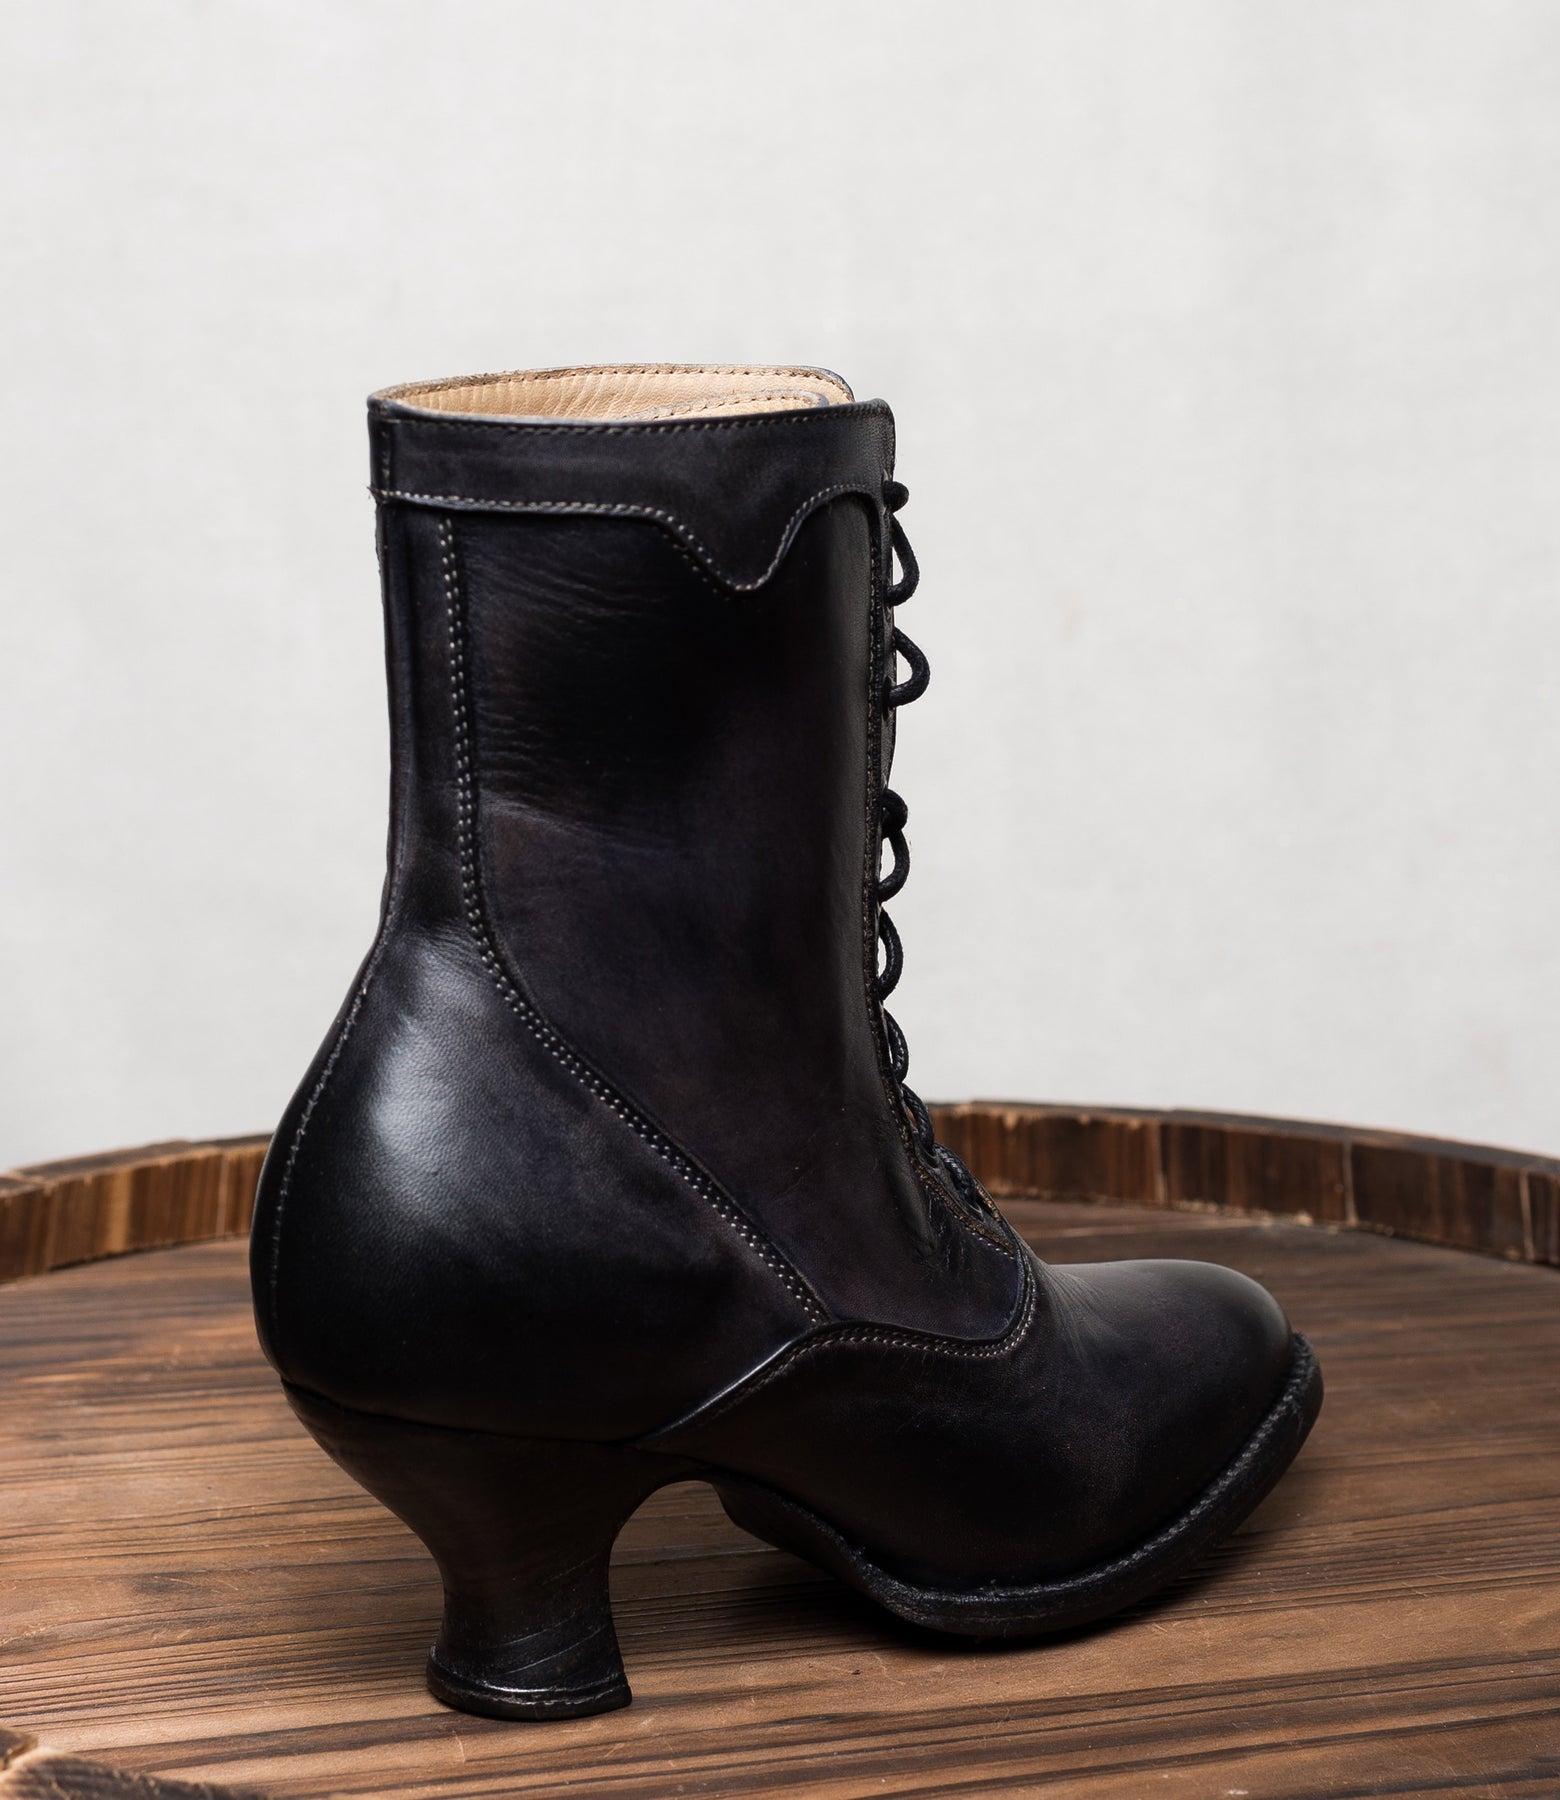 Victorian Style Leather Ankle Boots in Black Rustic by Oak Tree Farms ...